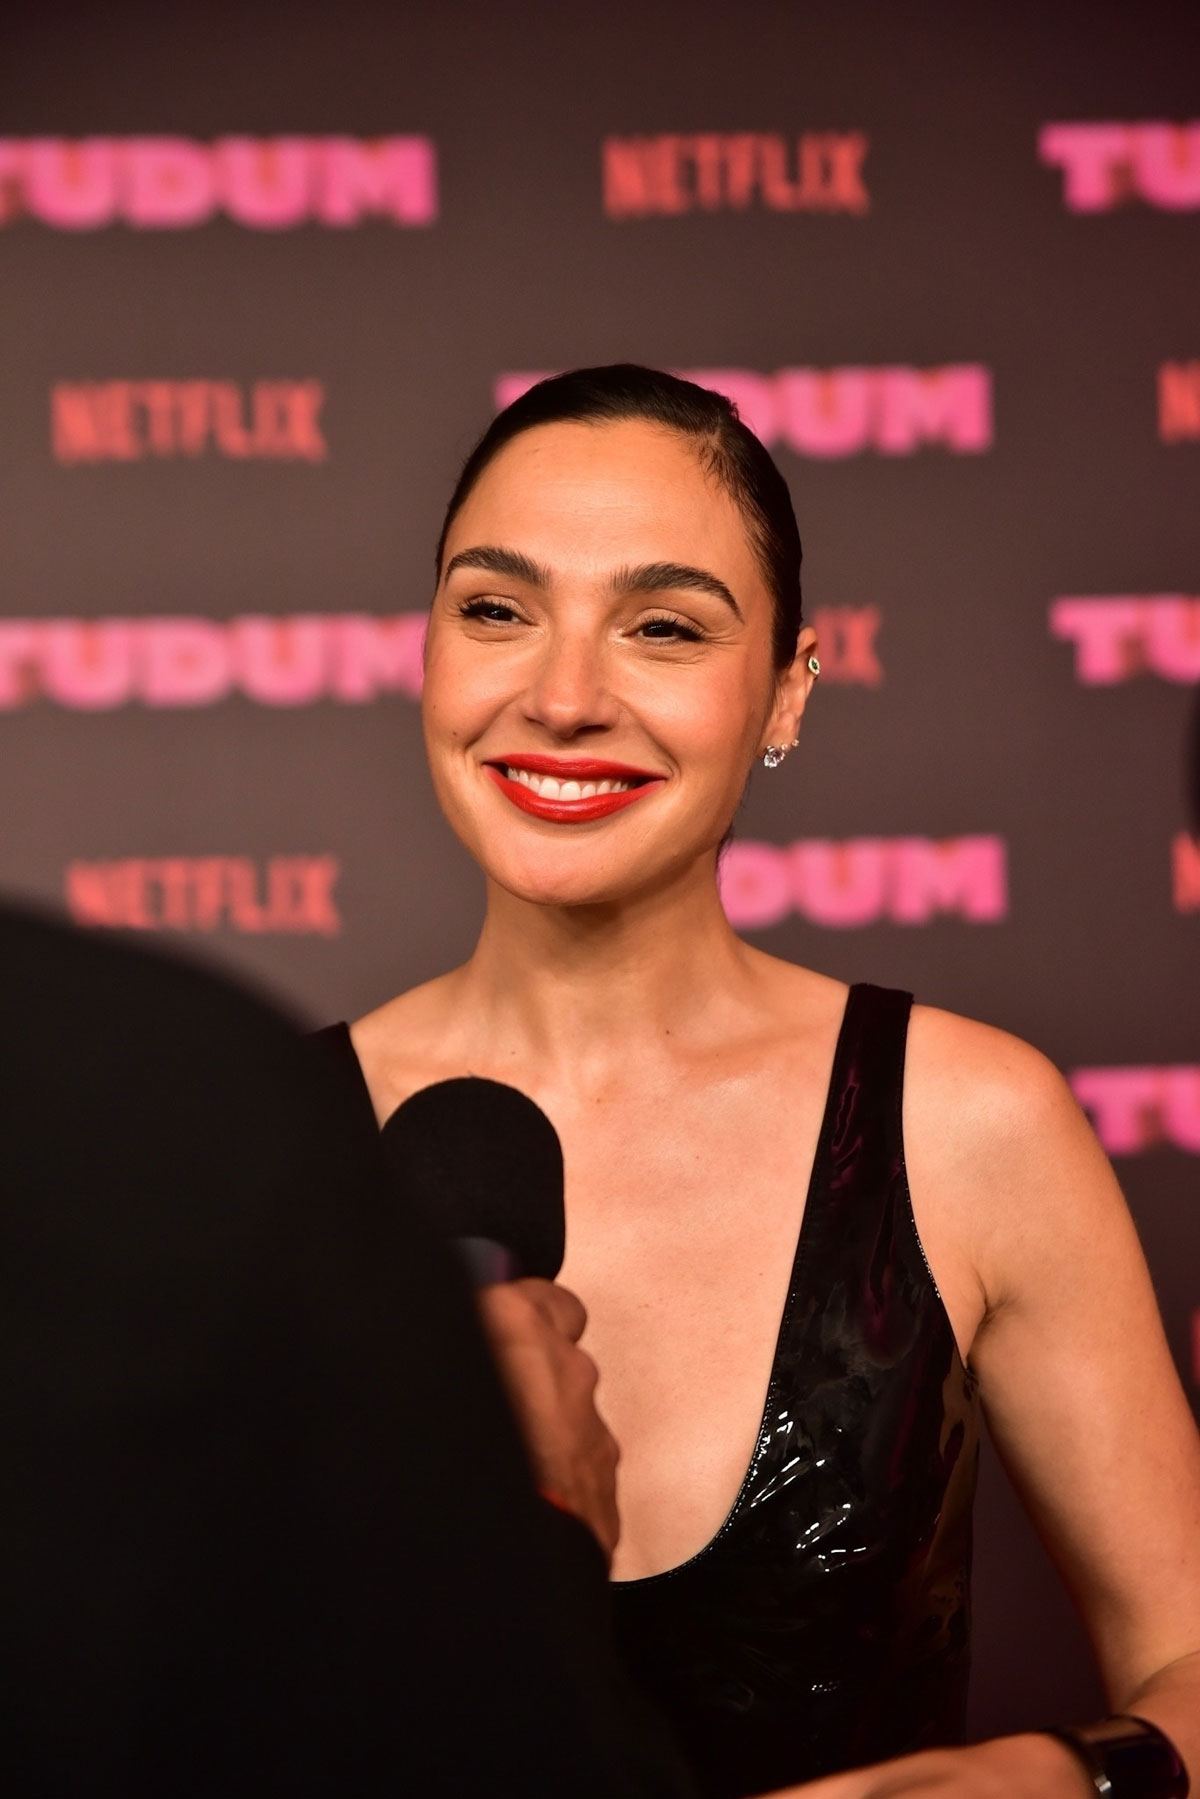 Gal Gadot is trying to change the narrative that Cleopatra was just a seductress.